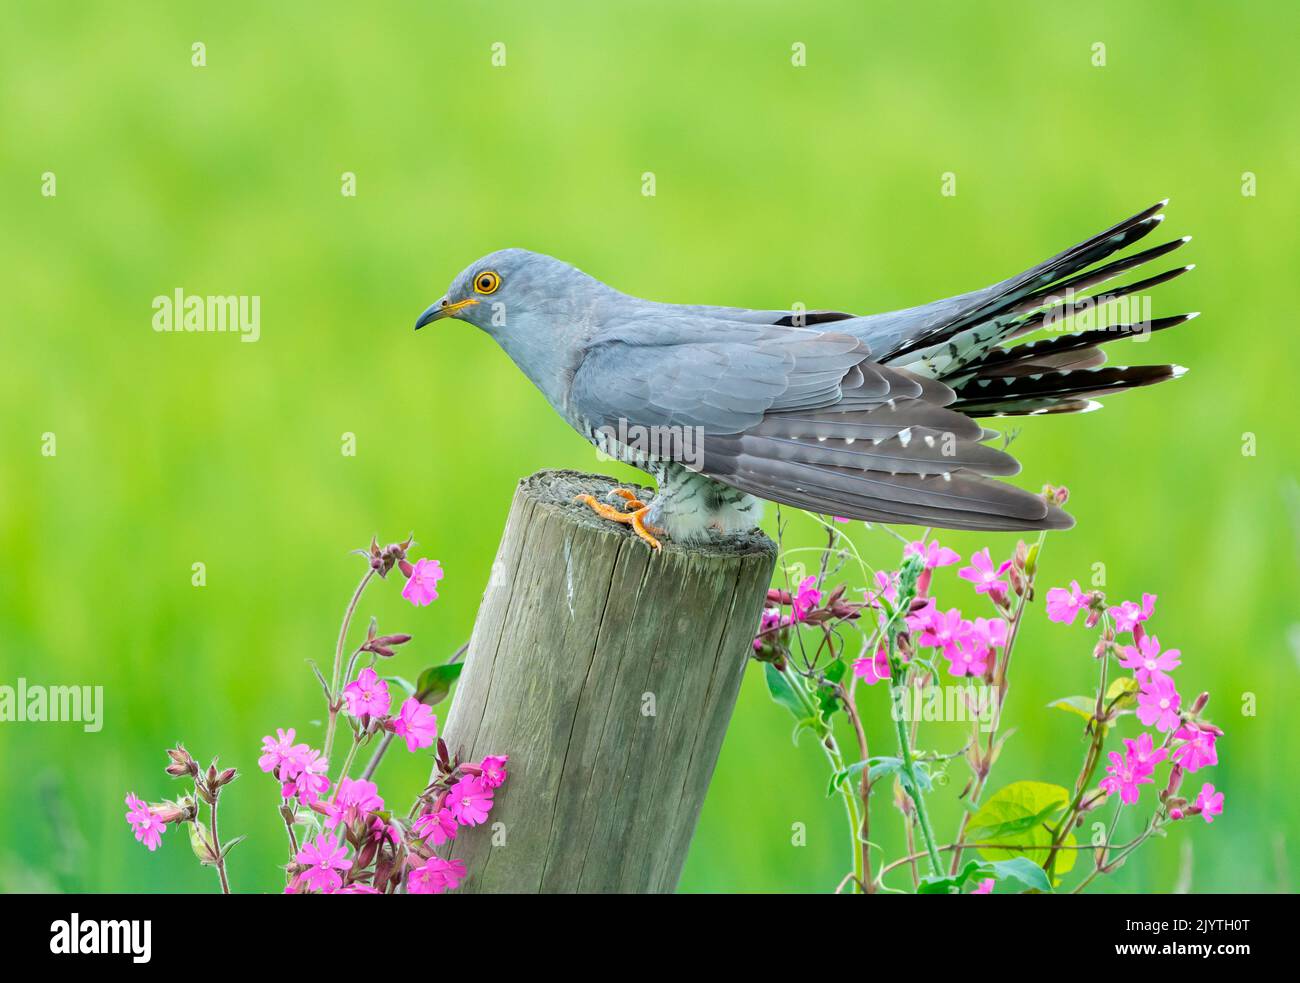 Cuckoo (Cuculus canorus) perched on a post amongst flowers, England Stock Photo